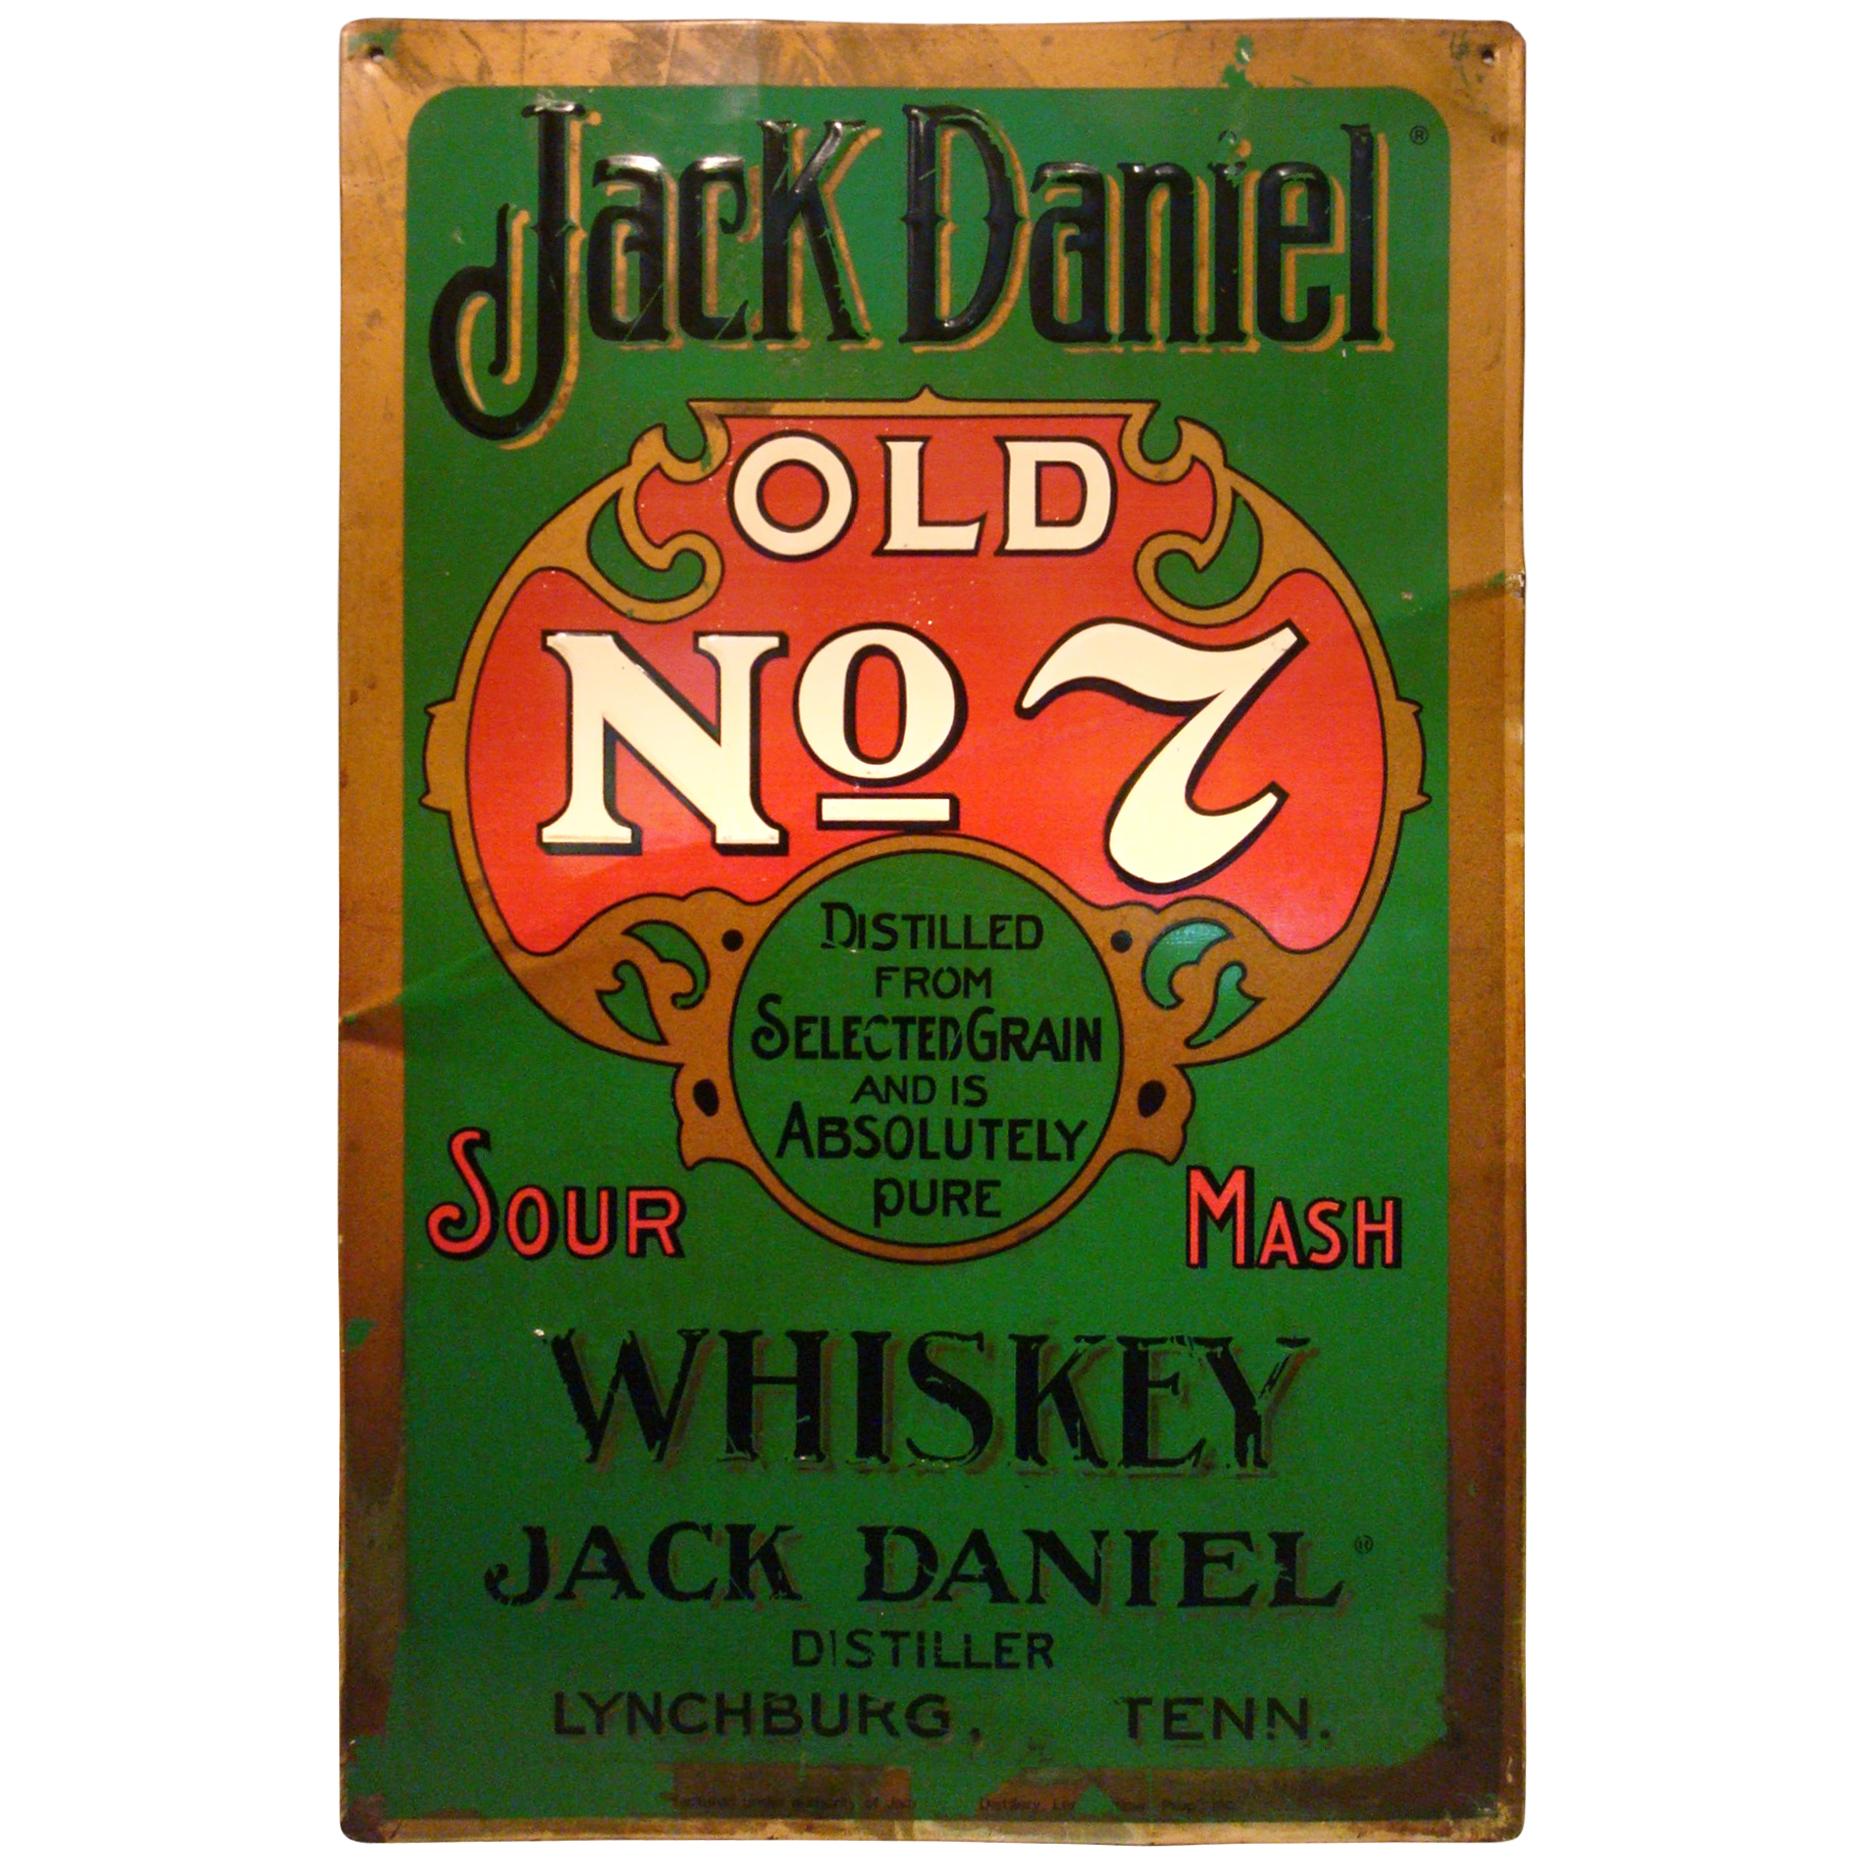 JACK DANIELS OLD #7 SOUR MASH WHISKEY TIN SIGN  MAN CAVE METAL POSTER WALL ART 